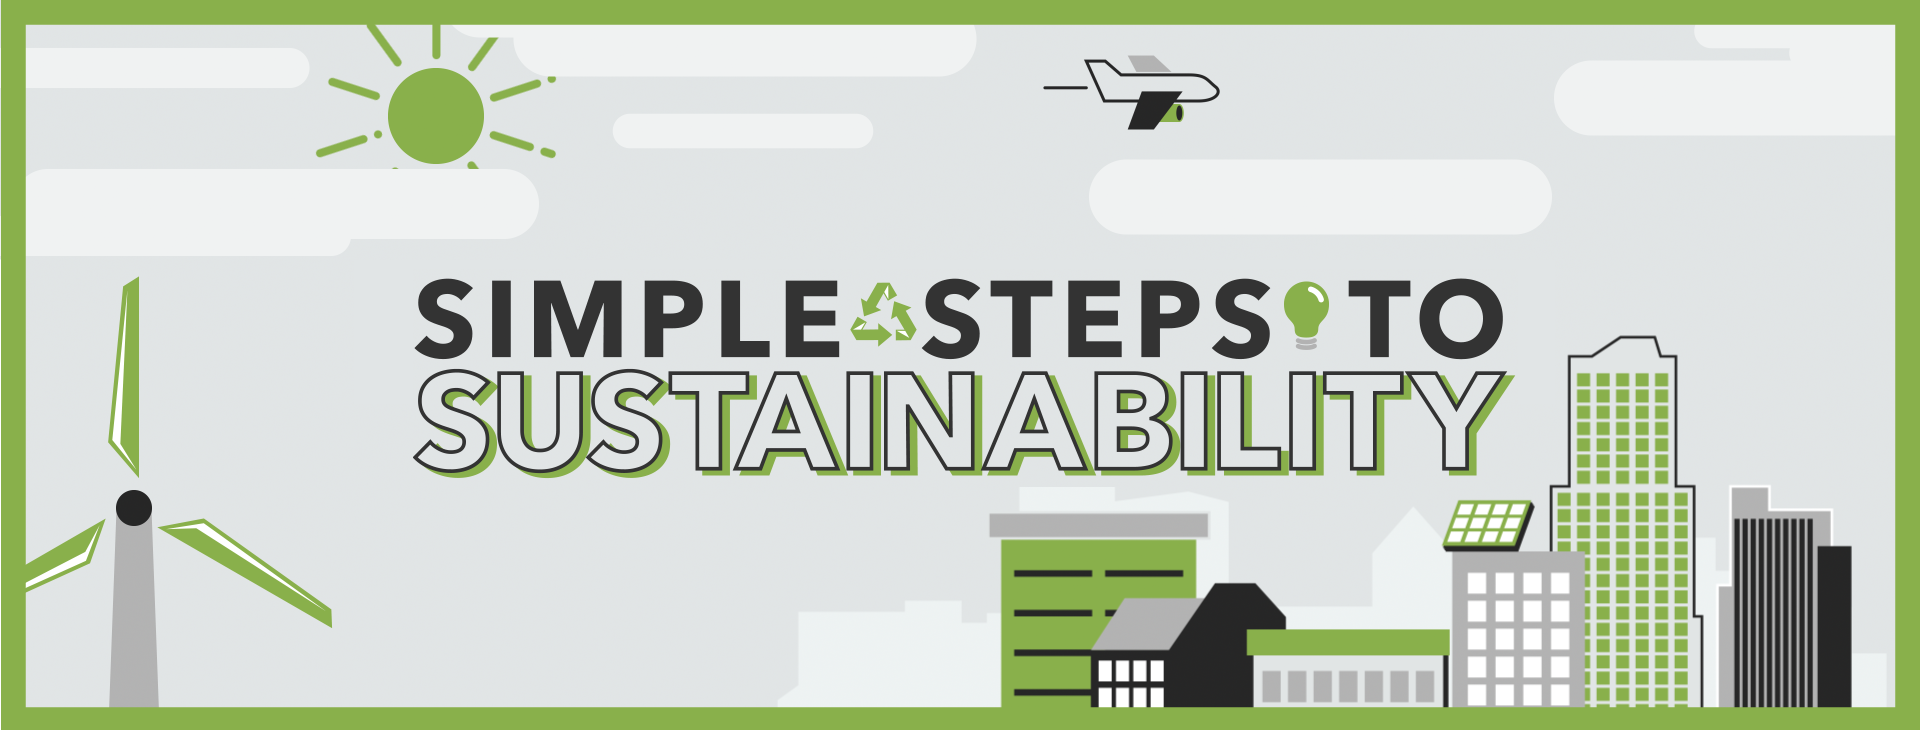 Small Steps to Sustainability